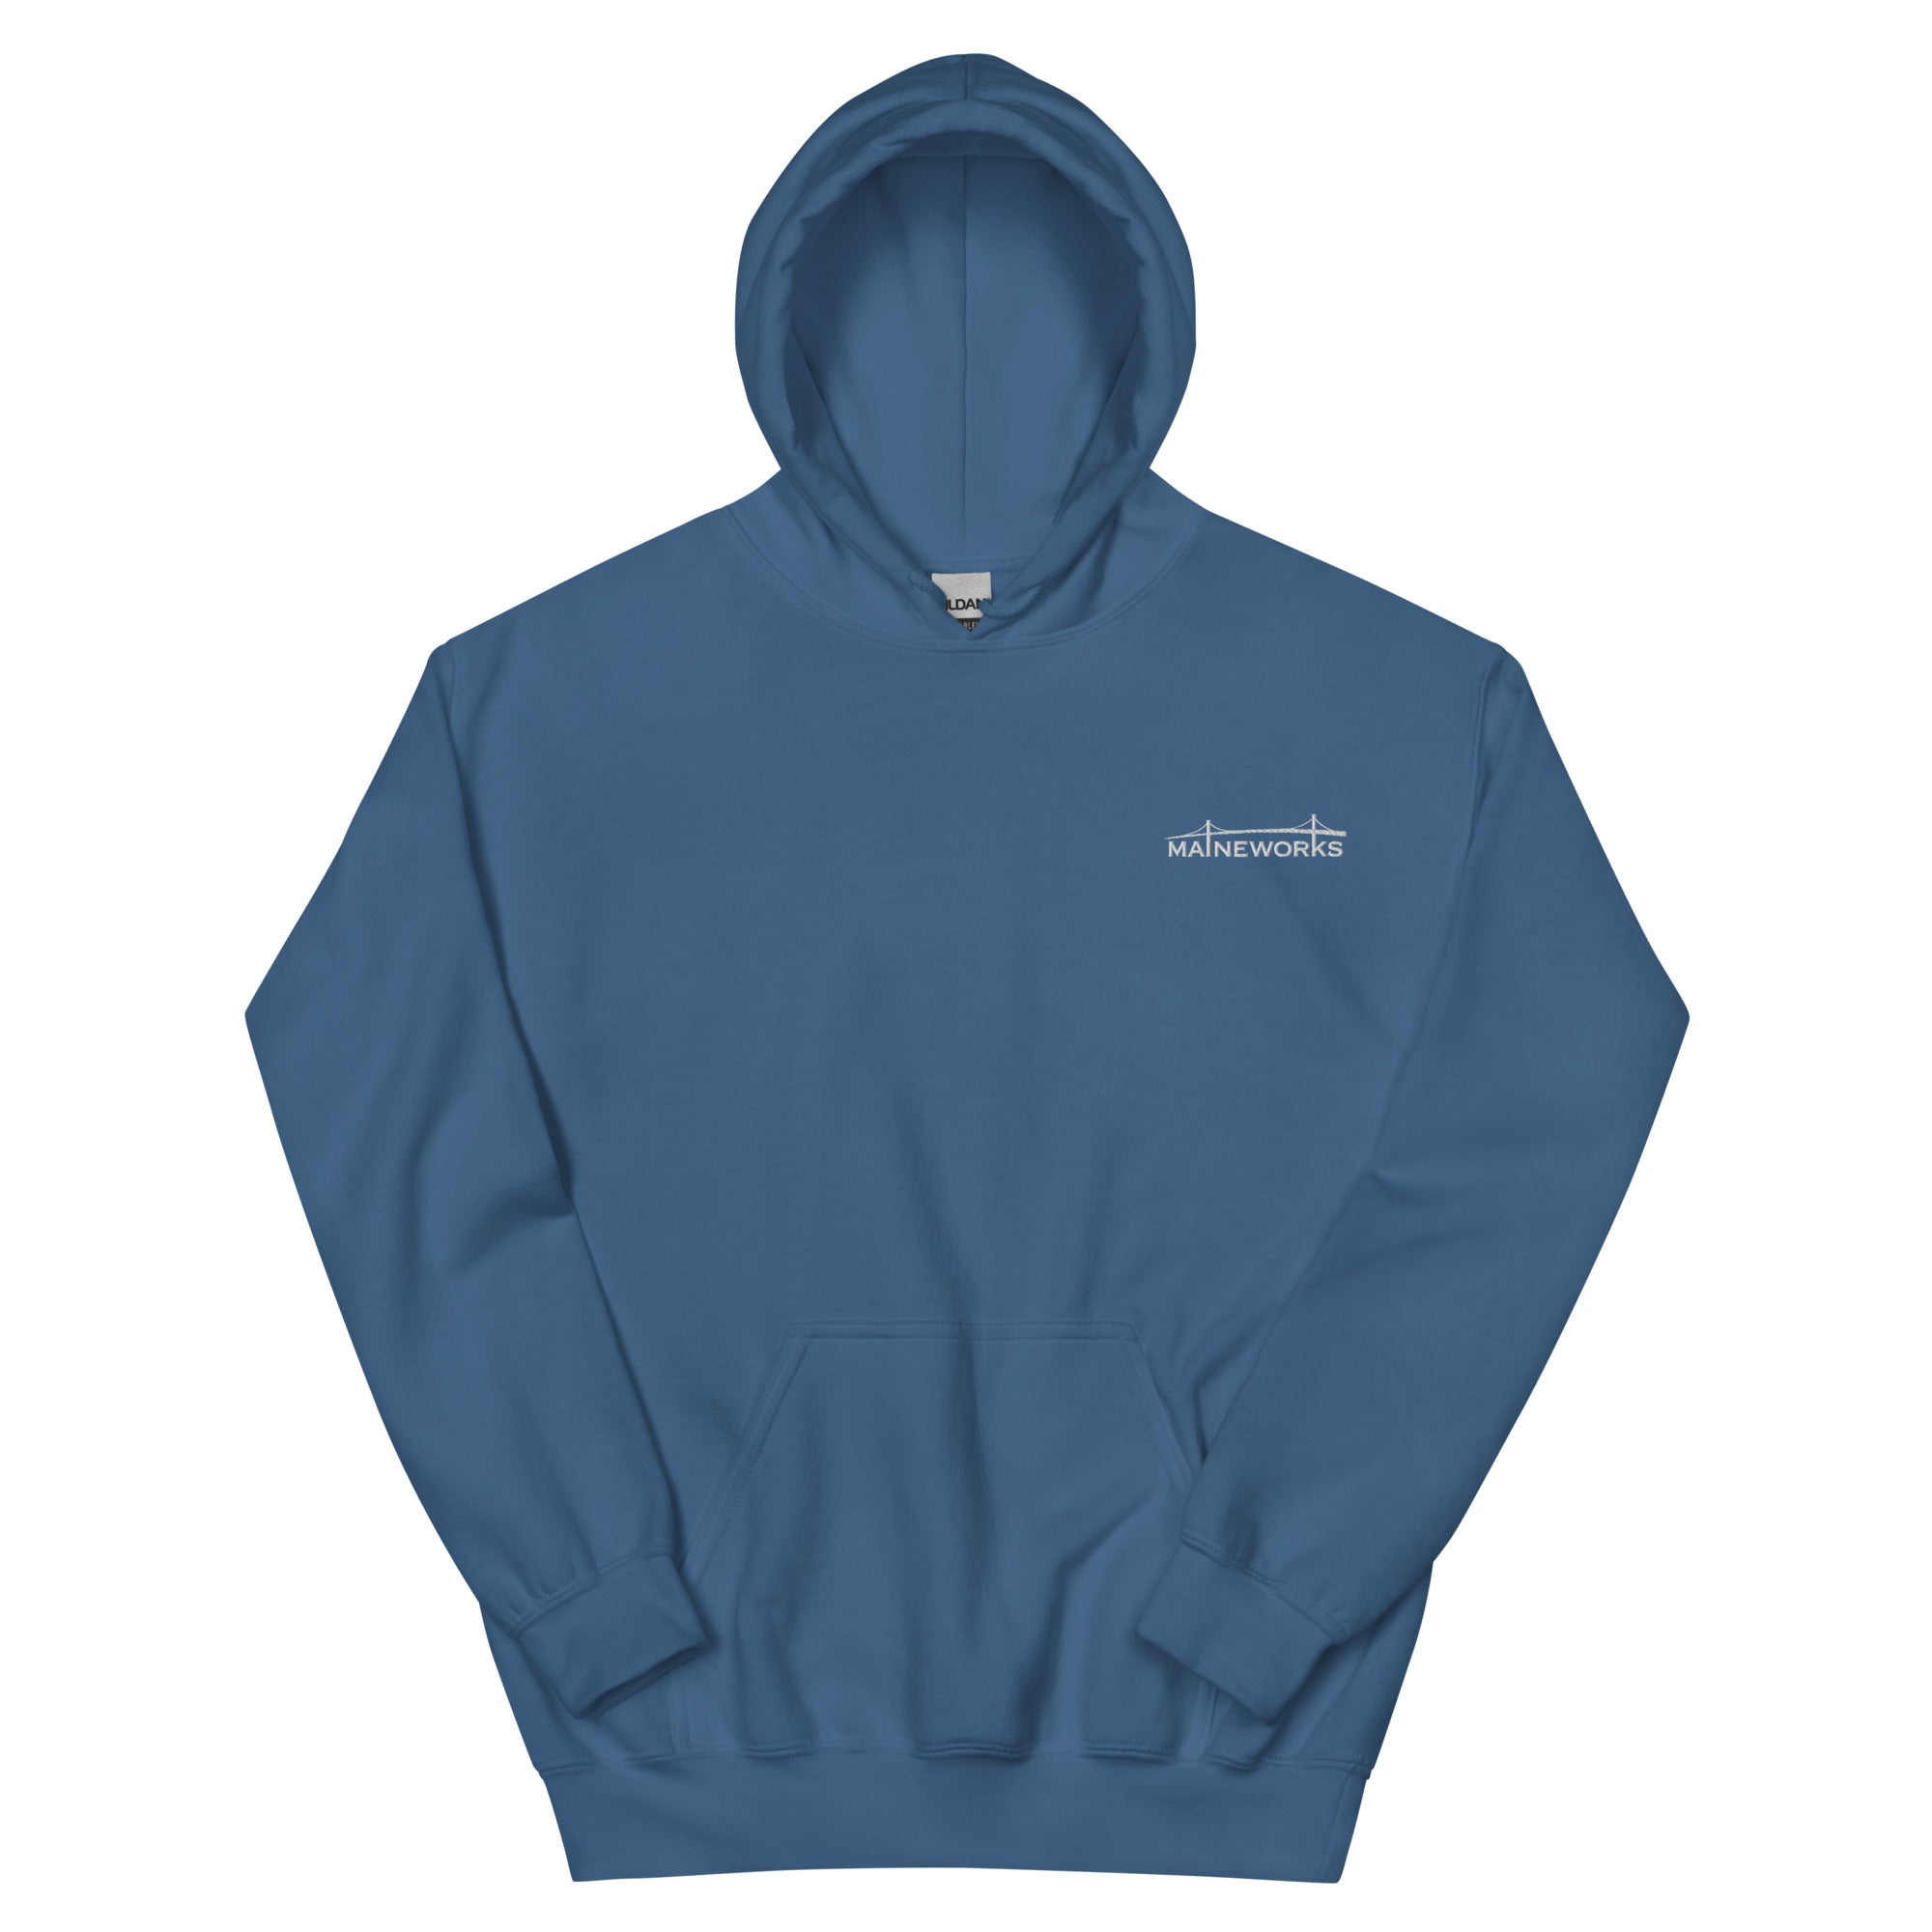 New MaineWorks Embroidered Hoodie